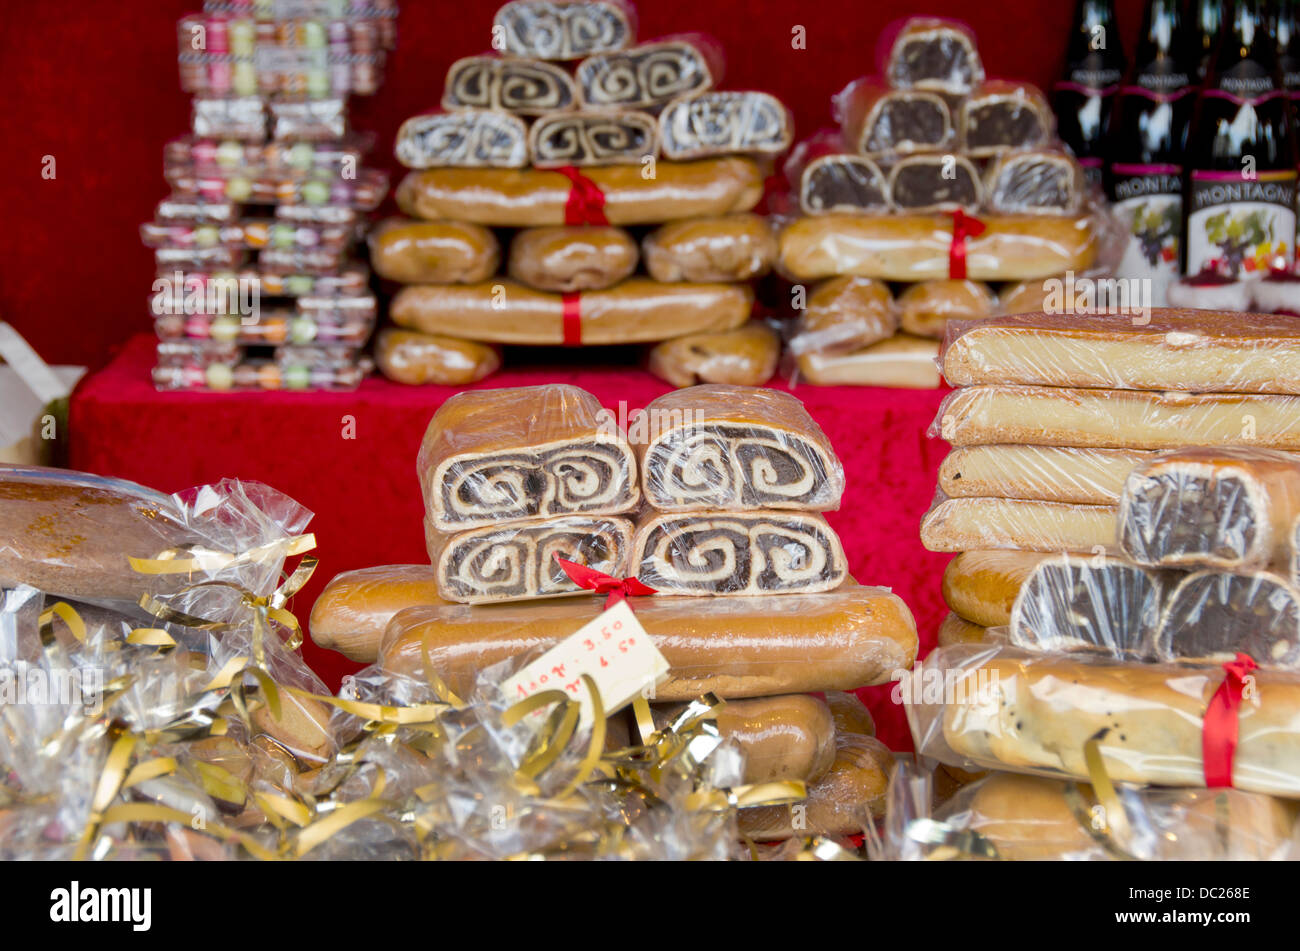 Switzerland, Basel. Basel Winter Holiday Market at Barfusserplatz. Traditional home made holiday cookies and breads for sale. Stock Photo